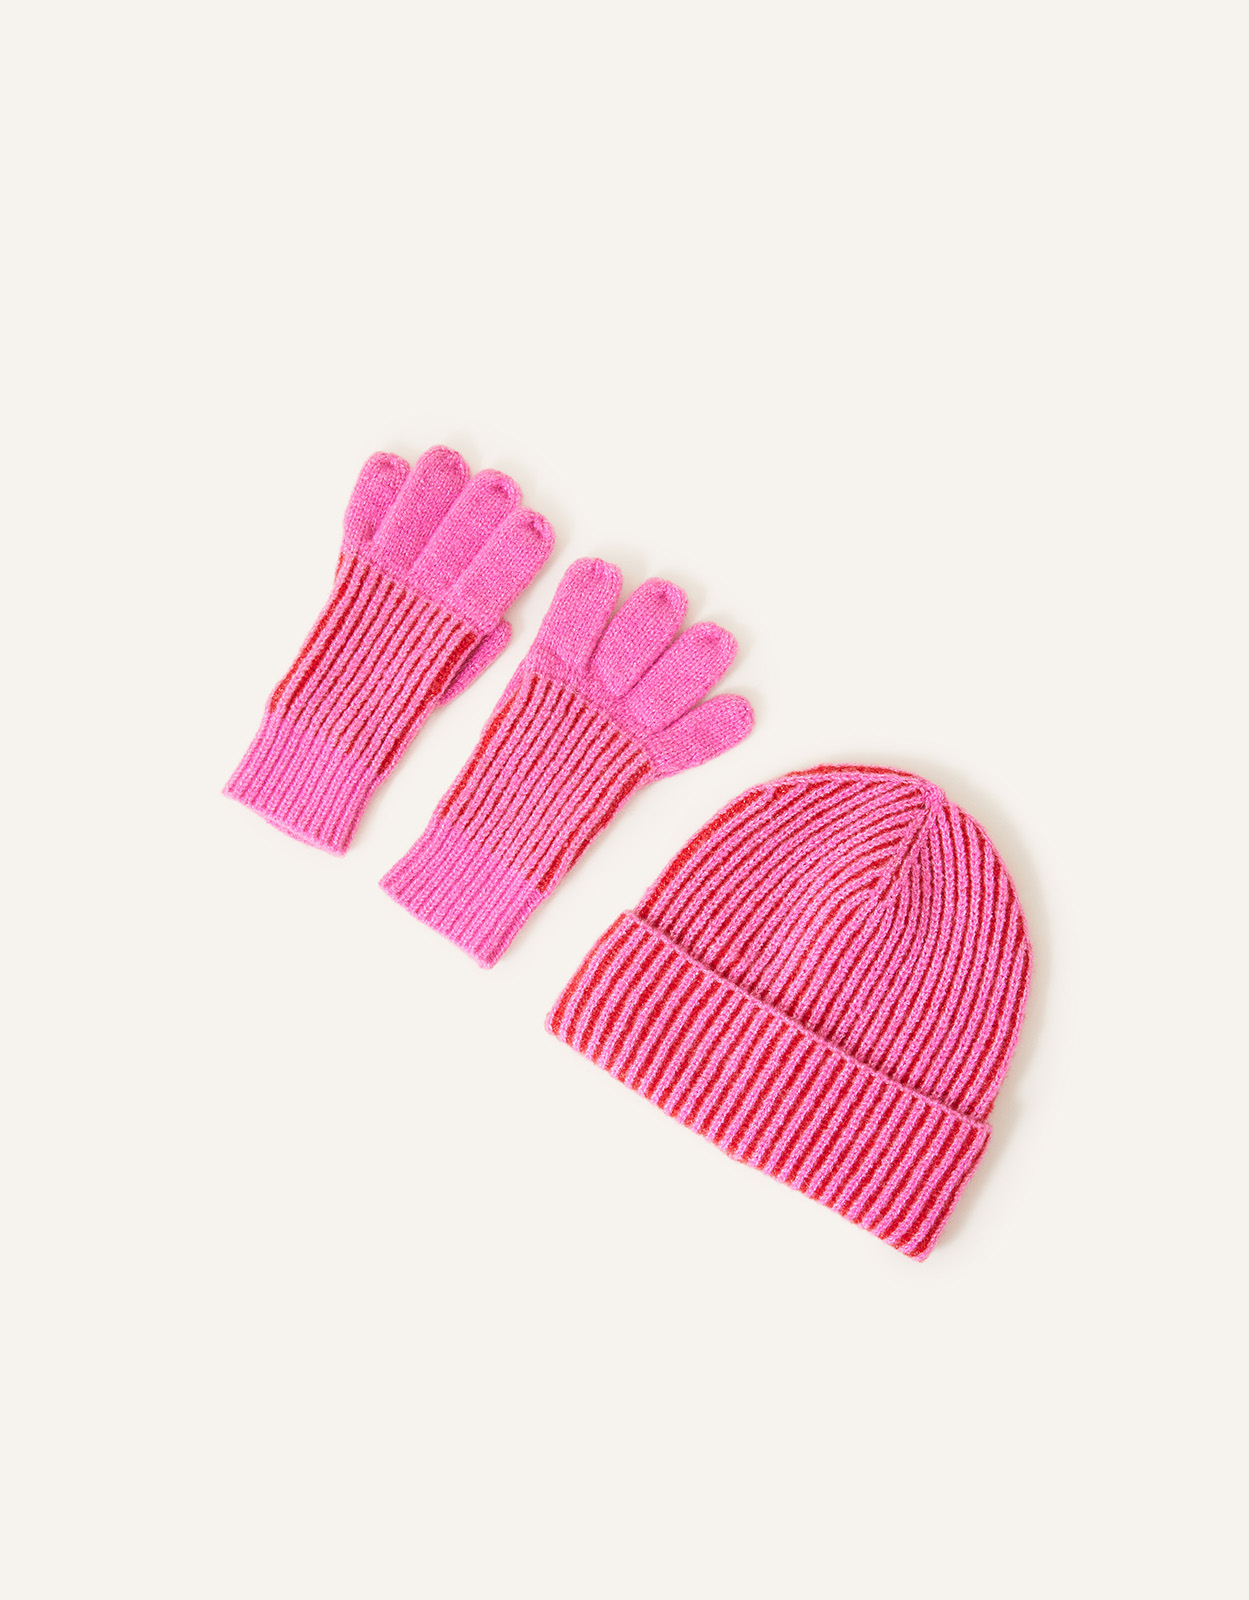 Accessorize Girl's Girls Hat and Gloves Set Pink, Size: 3-5 yrs